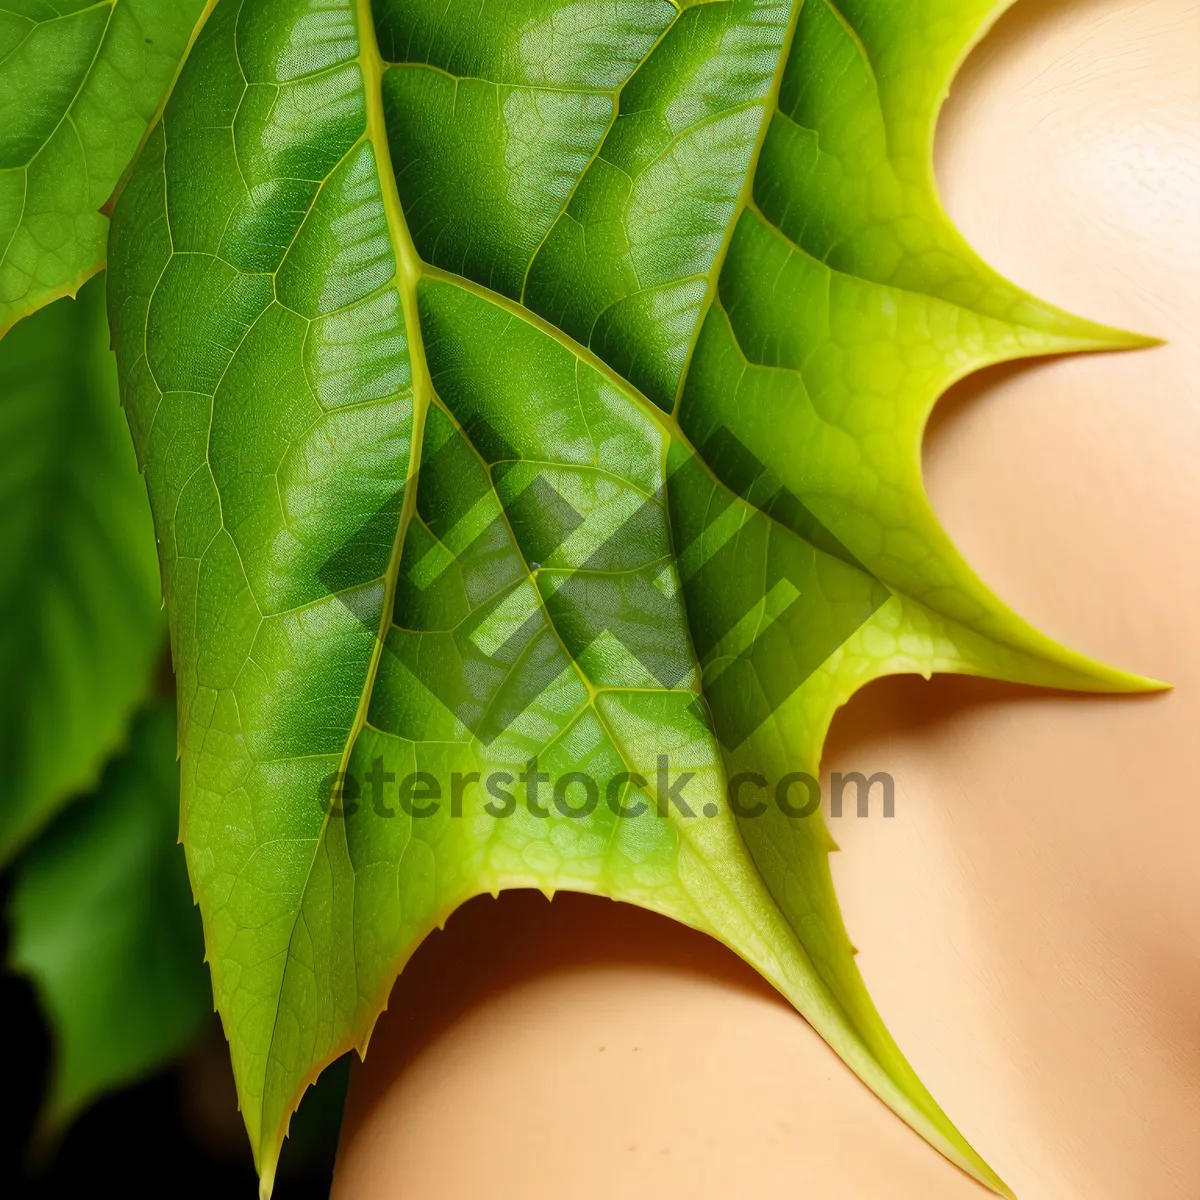 Picture of Vibrant Oak Leaf in Natural Spring Environment